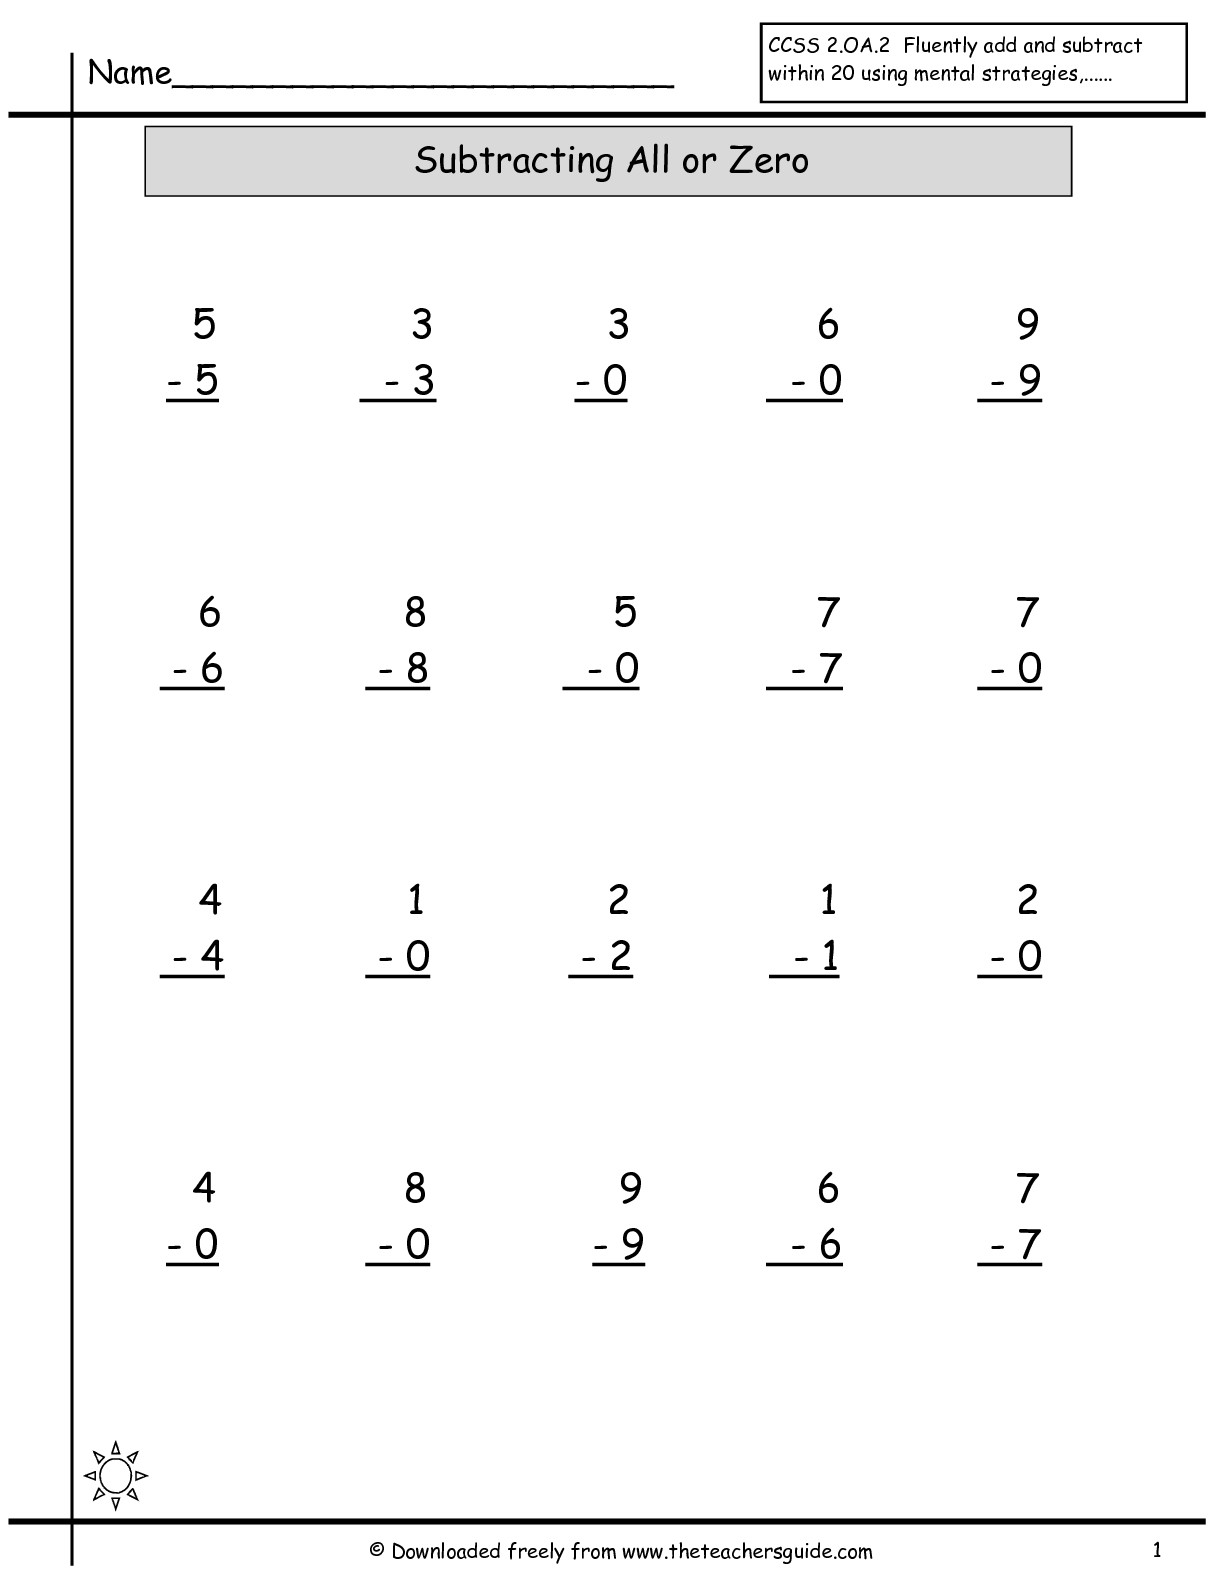 15 Best Images of Single Addition And Subtraction Worksheets - Single ...